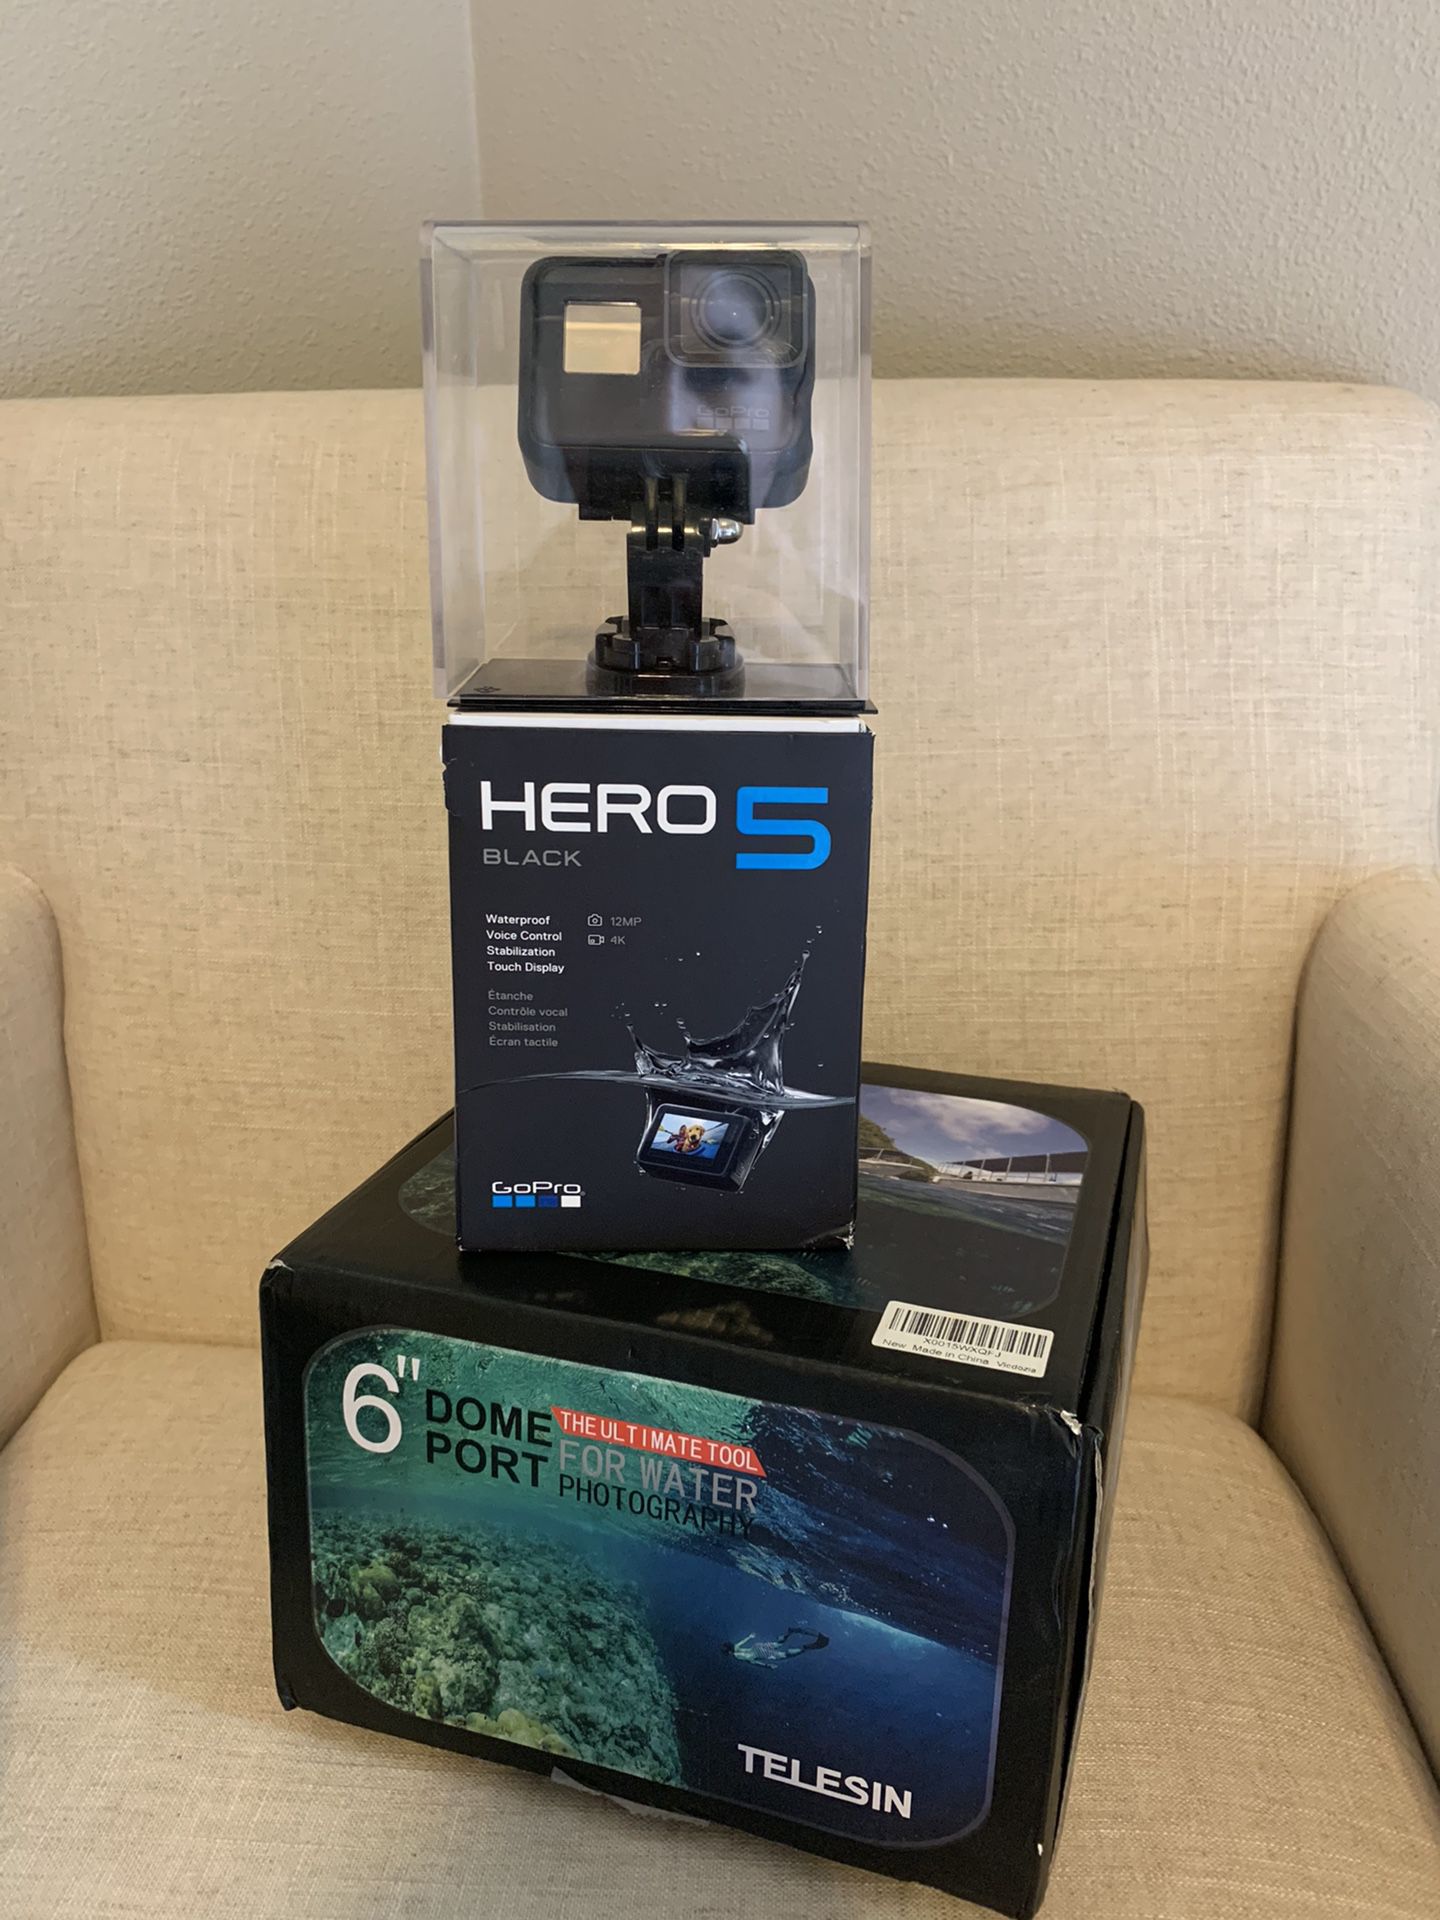 GoPro hero 5 black with 6”dome